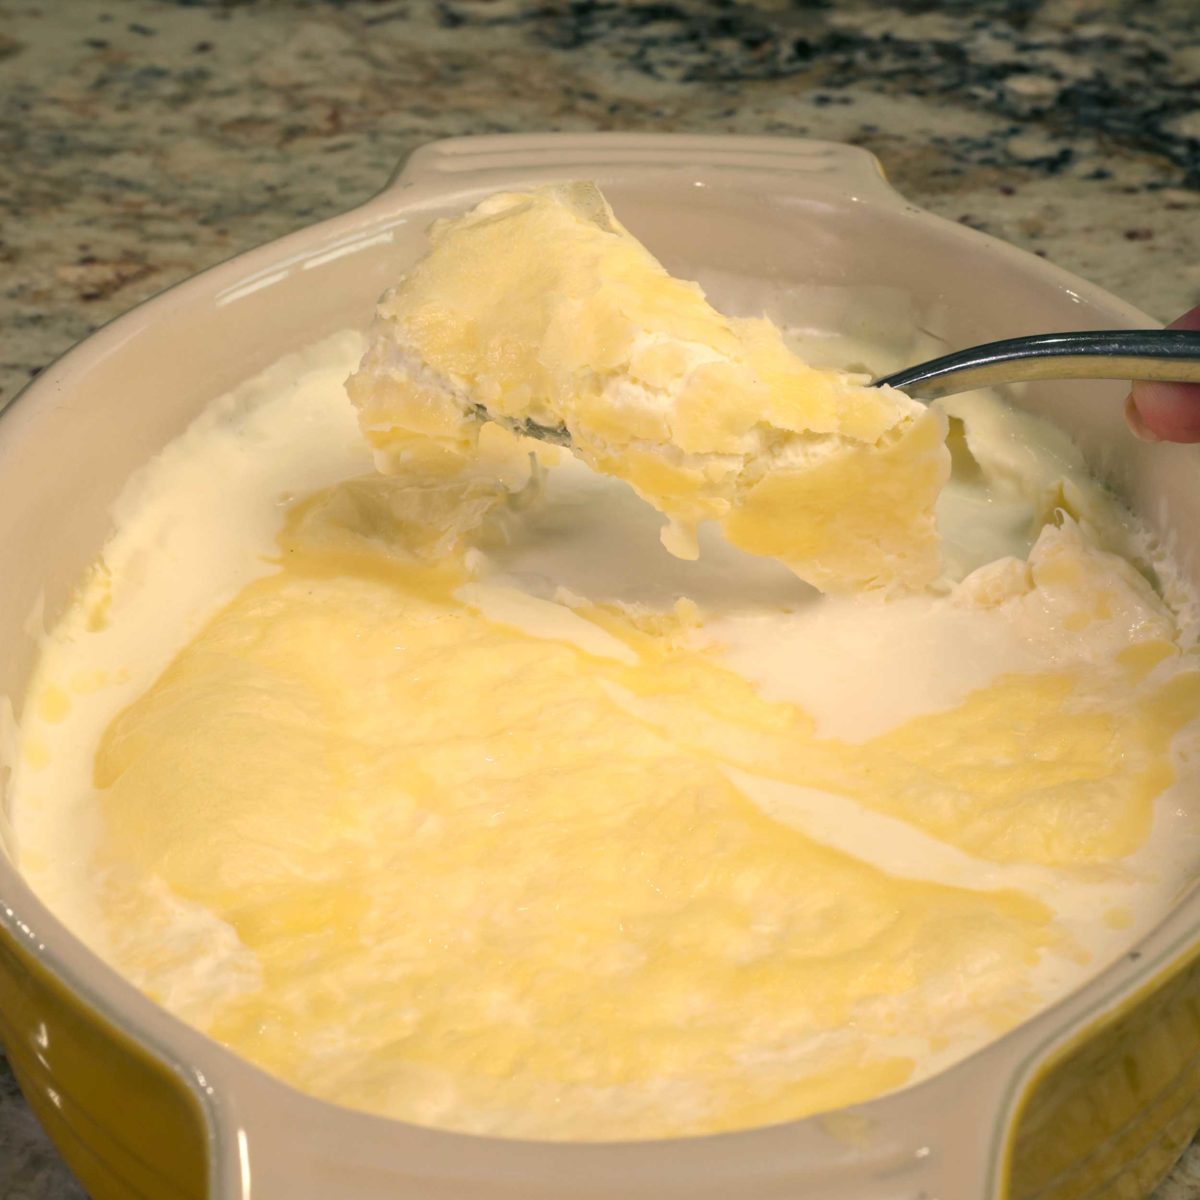 spooning clotted cream out of a dish